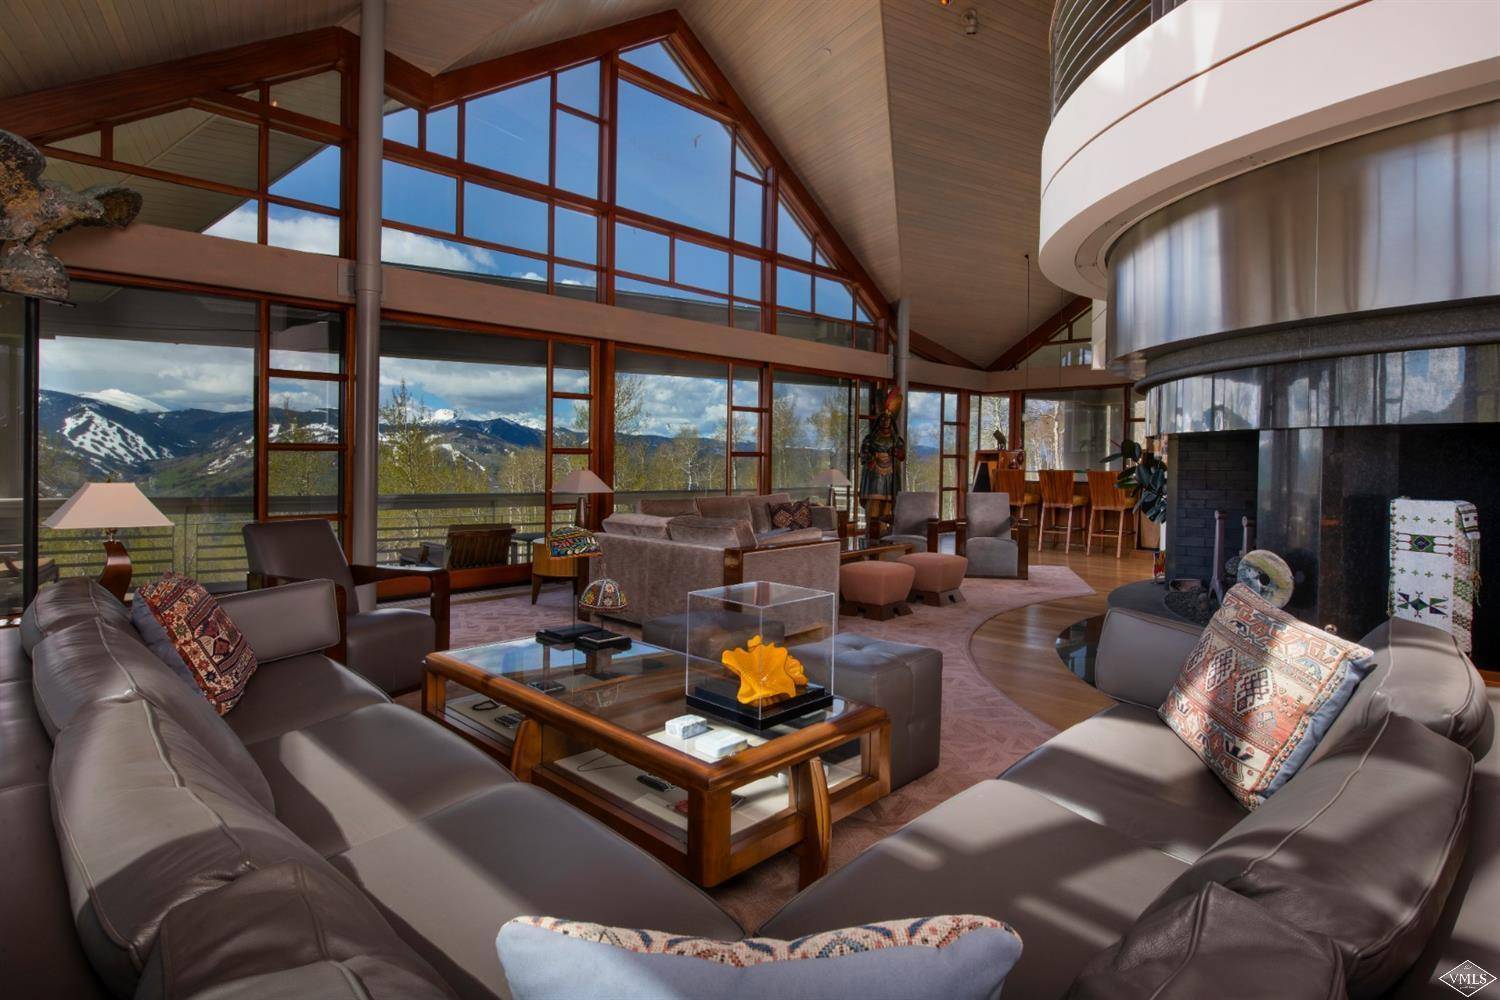 Opportunity to own one of the finest mountain contemporary homes ever built in the Vail Valley.